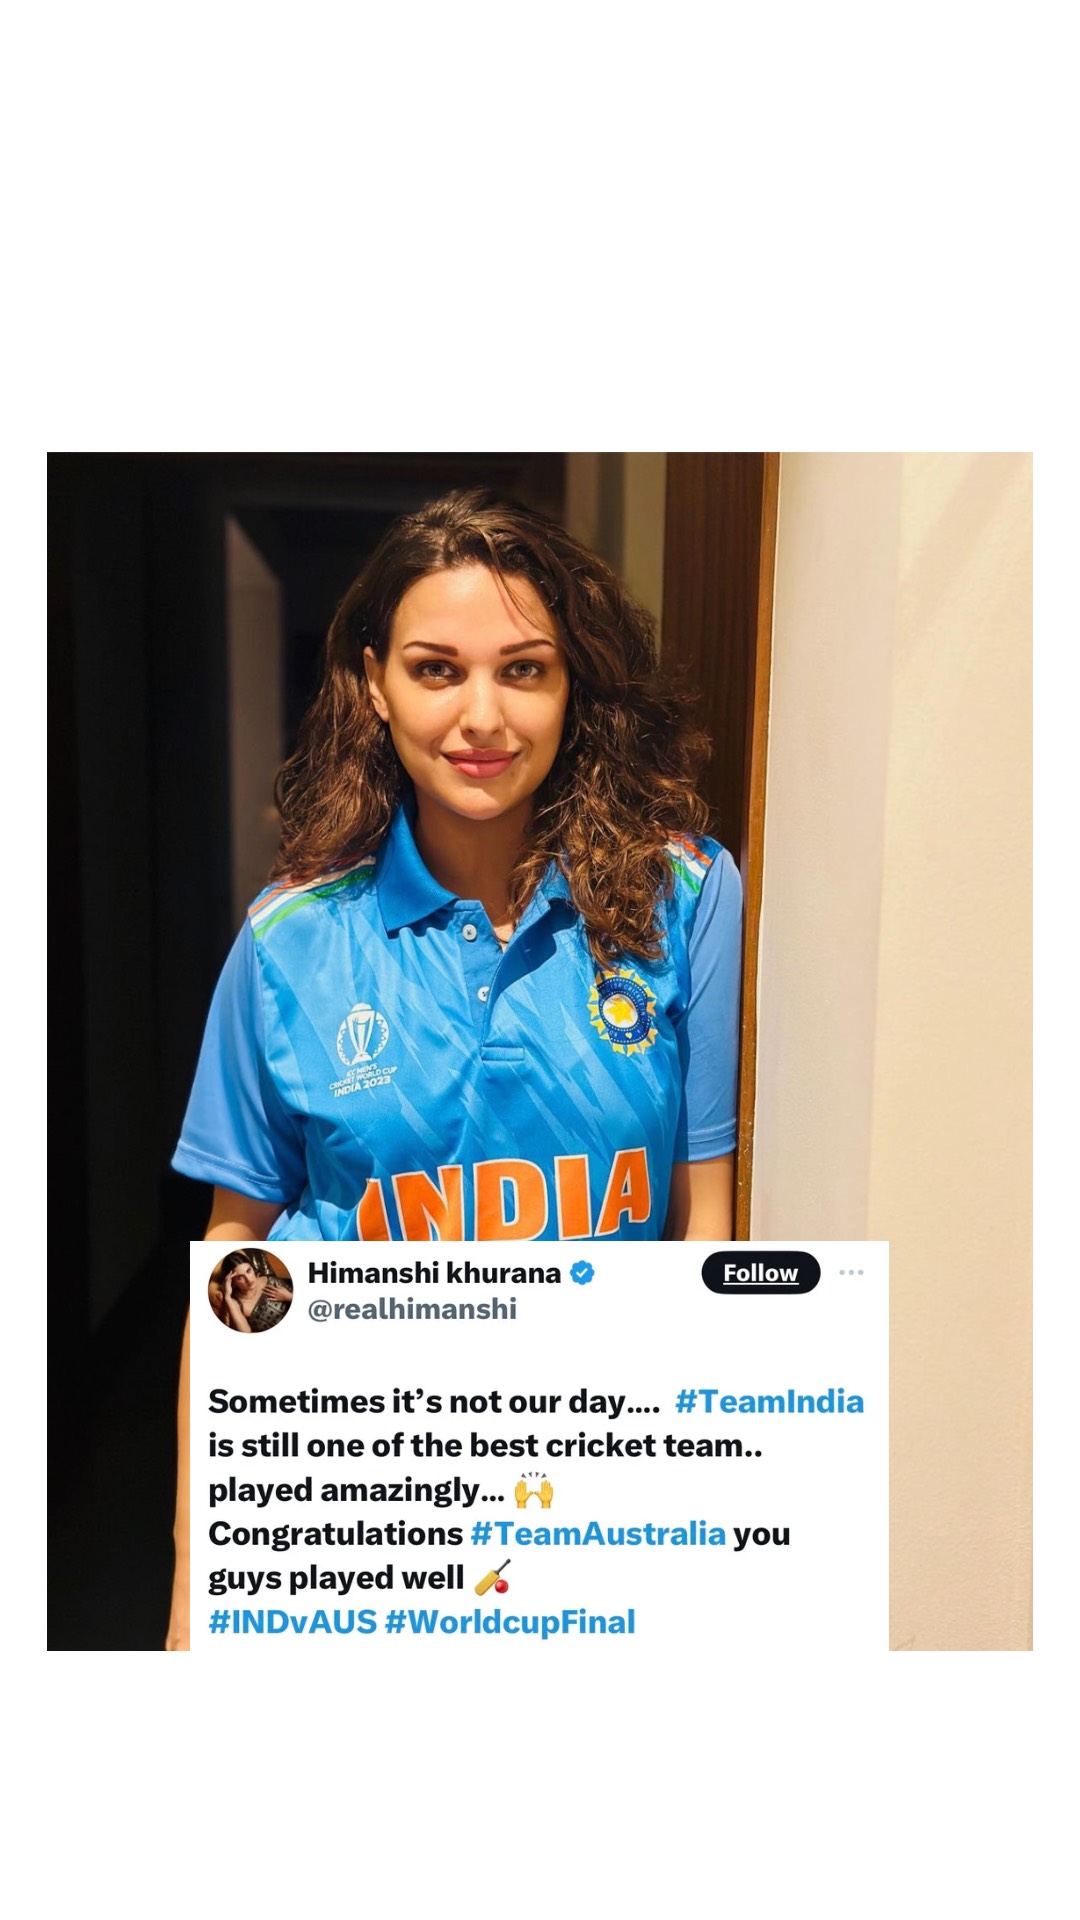 Bigg Boss 13 fame Himanshi Khurana shares a heart-warming post in support of Team India following loss at Cricket World Cup final; says “Team India is still one of the best cricket teams”